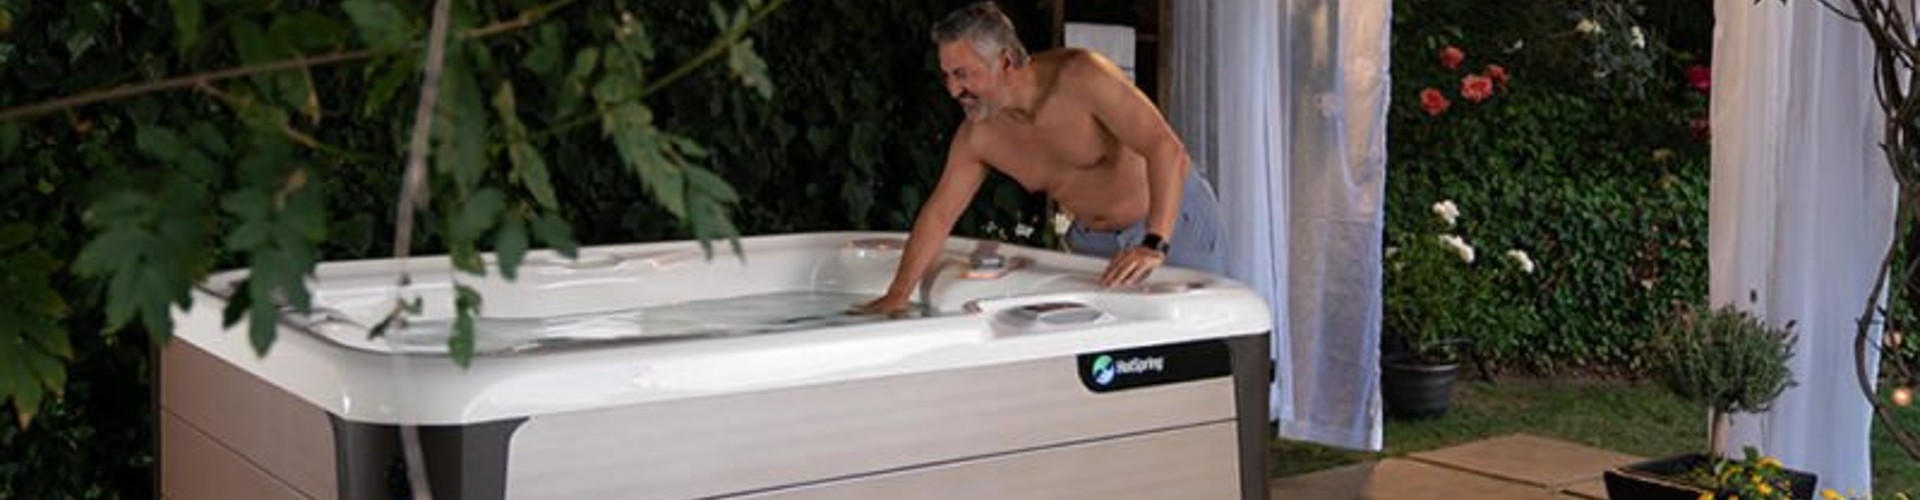 5 Reasons to Love a 2-Person or 3-Person Hot Tub